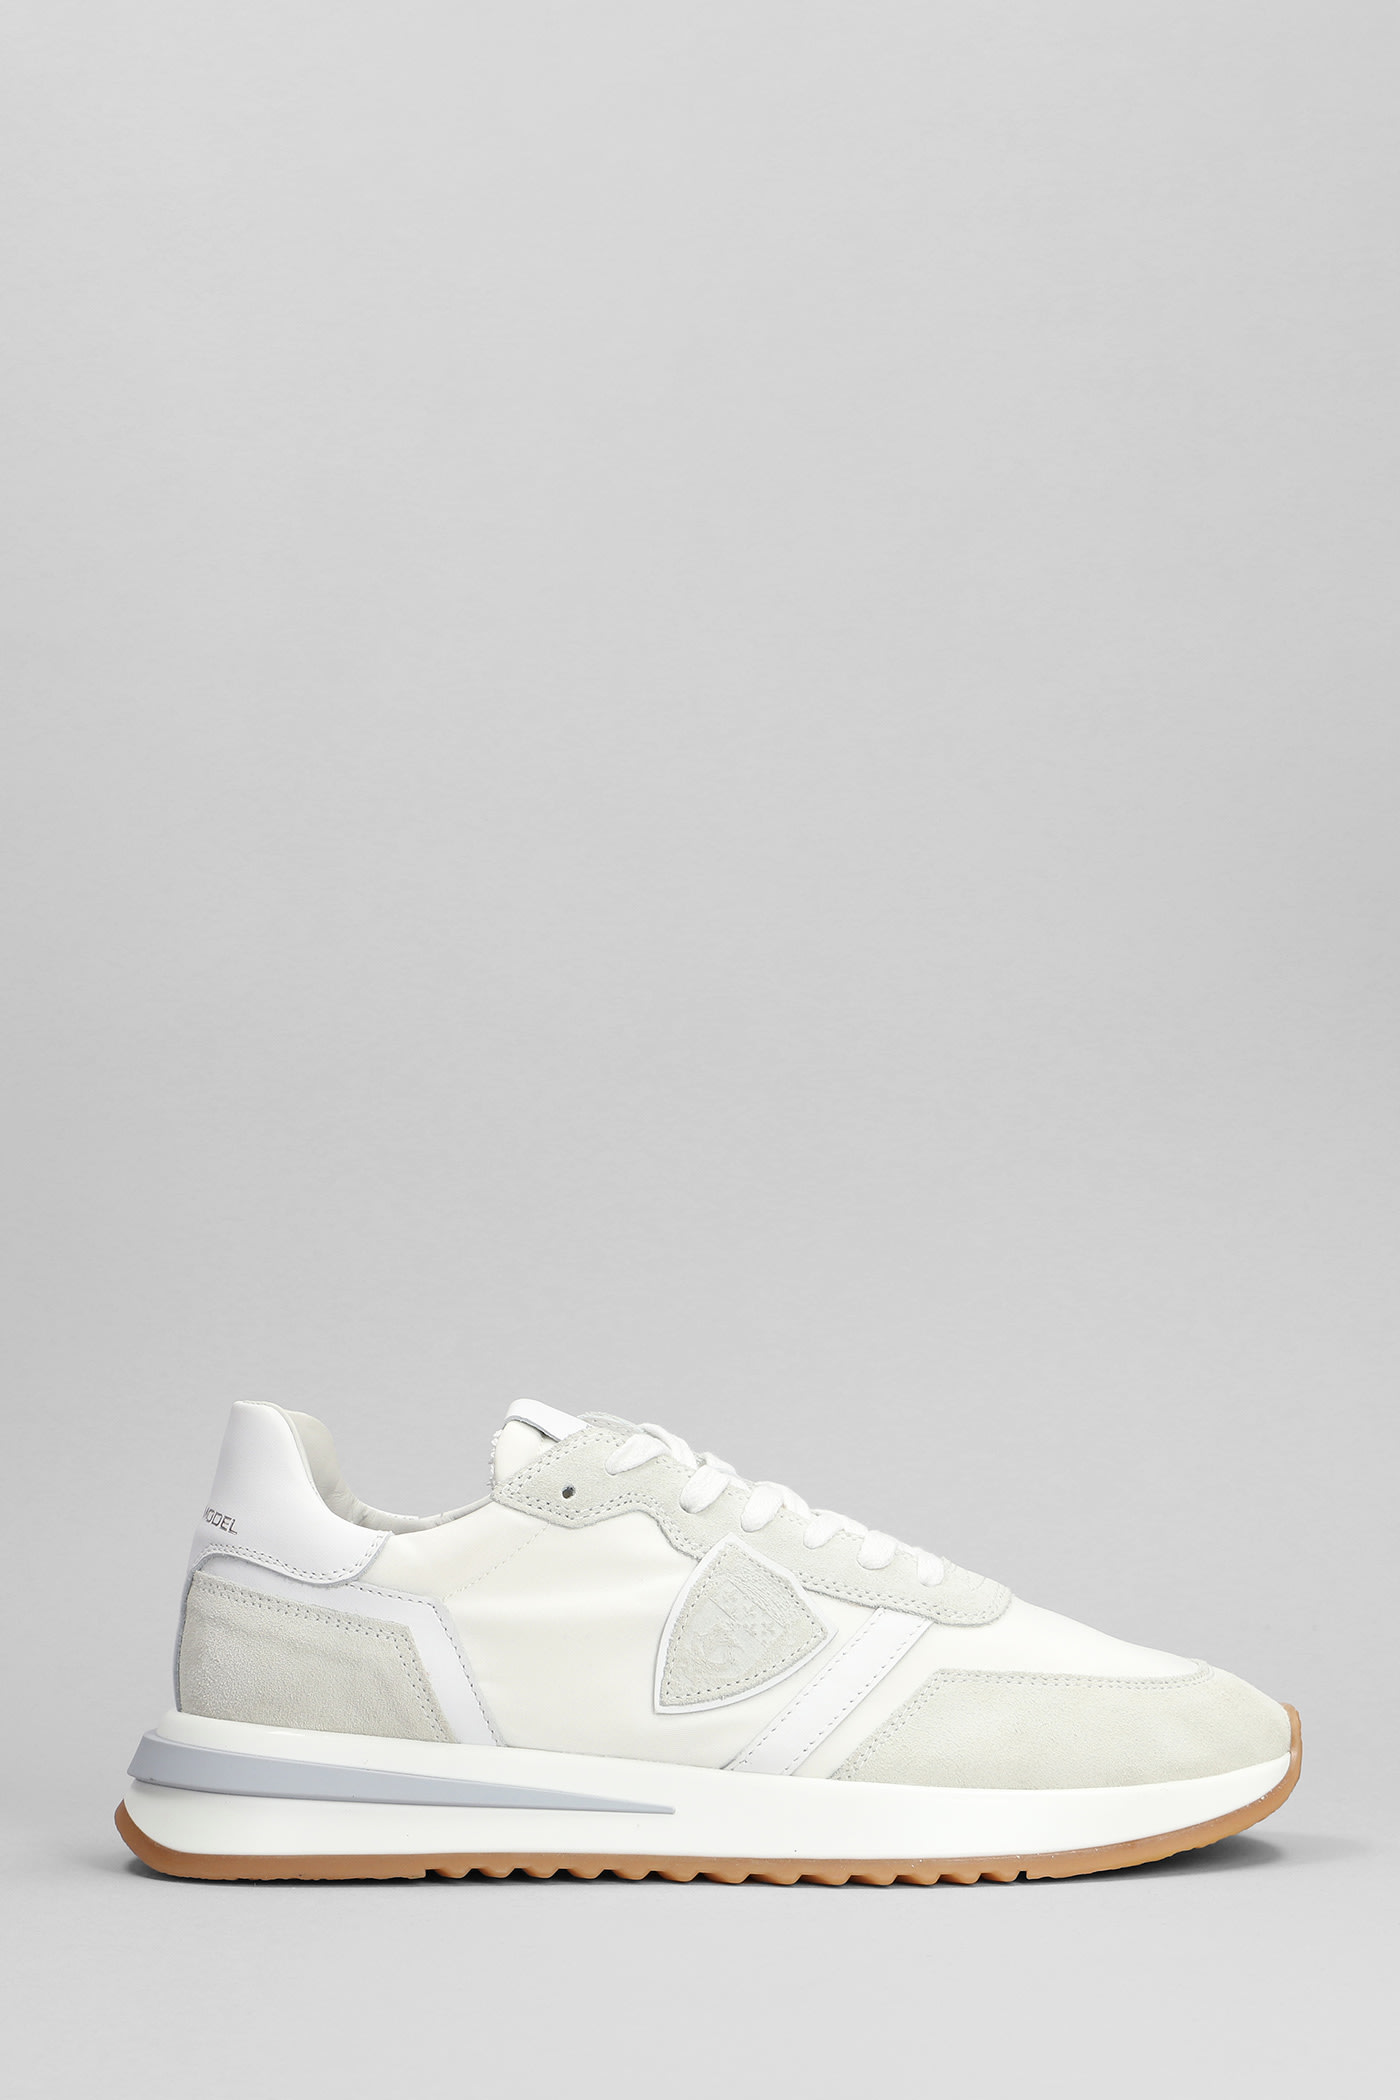 Tropez 2.1 Sneakers In White Suede And Fabric